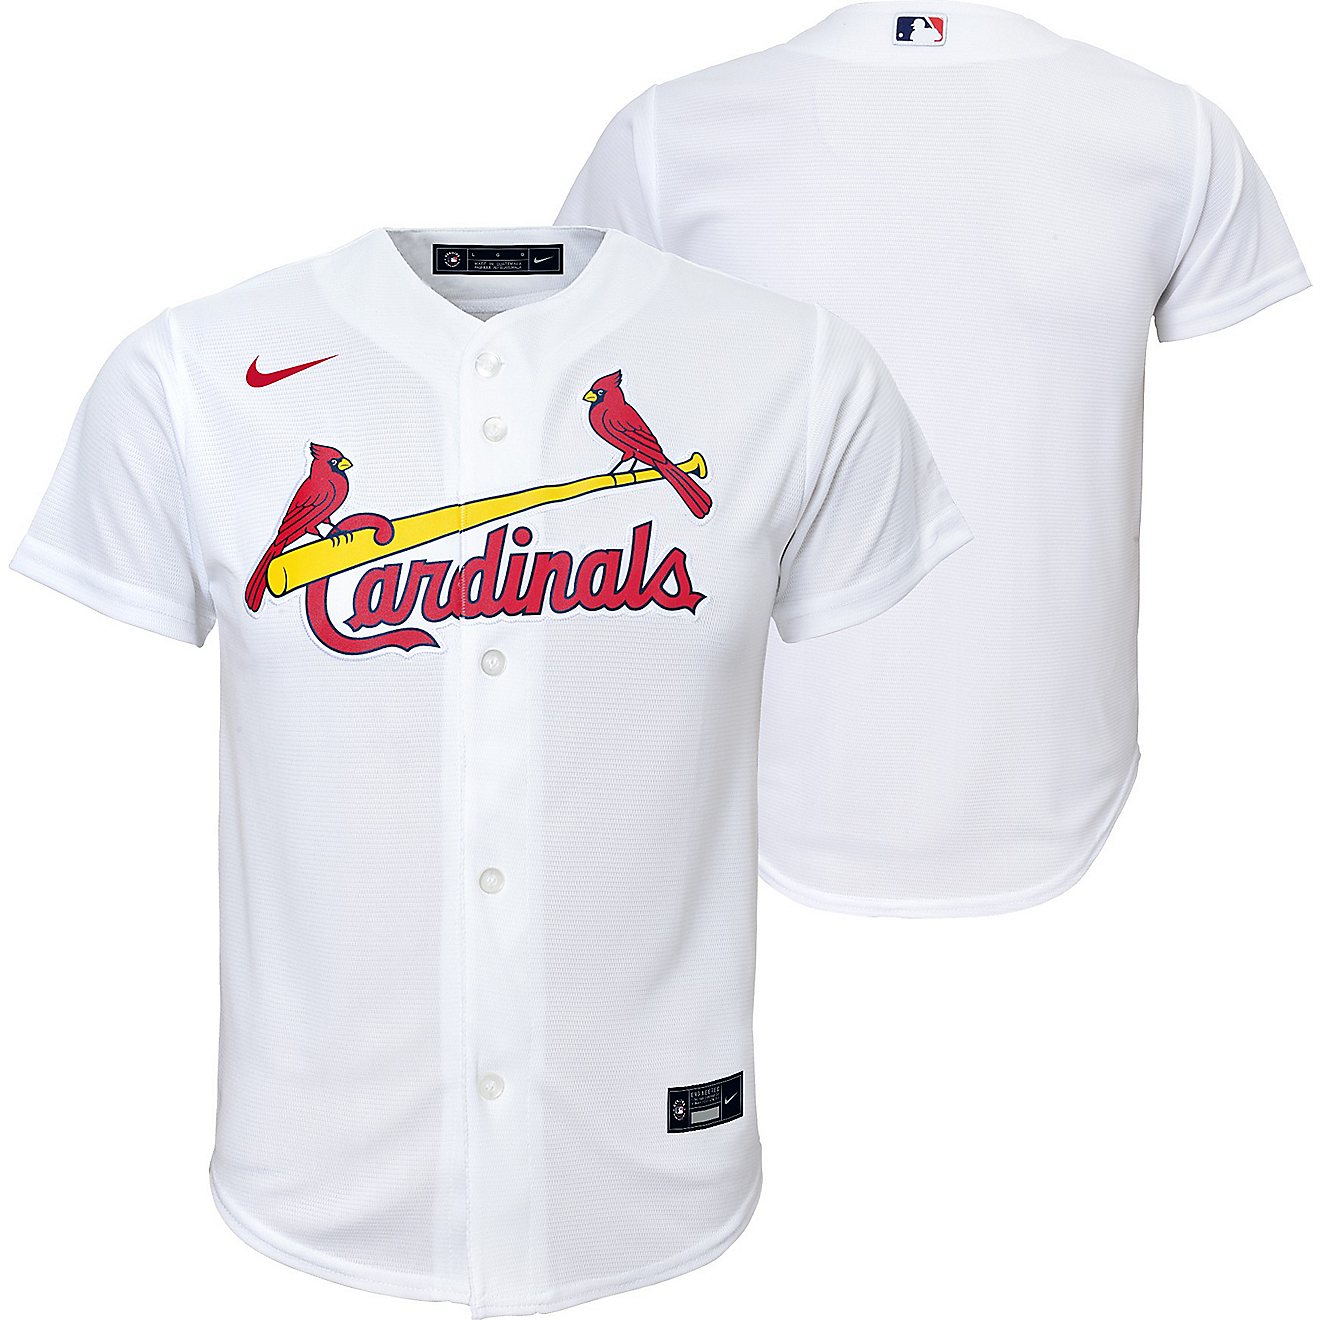 Nike Youth Arizona Cardinals Home Replica Jersey                                                                                 - view number 1